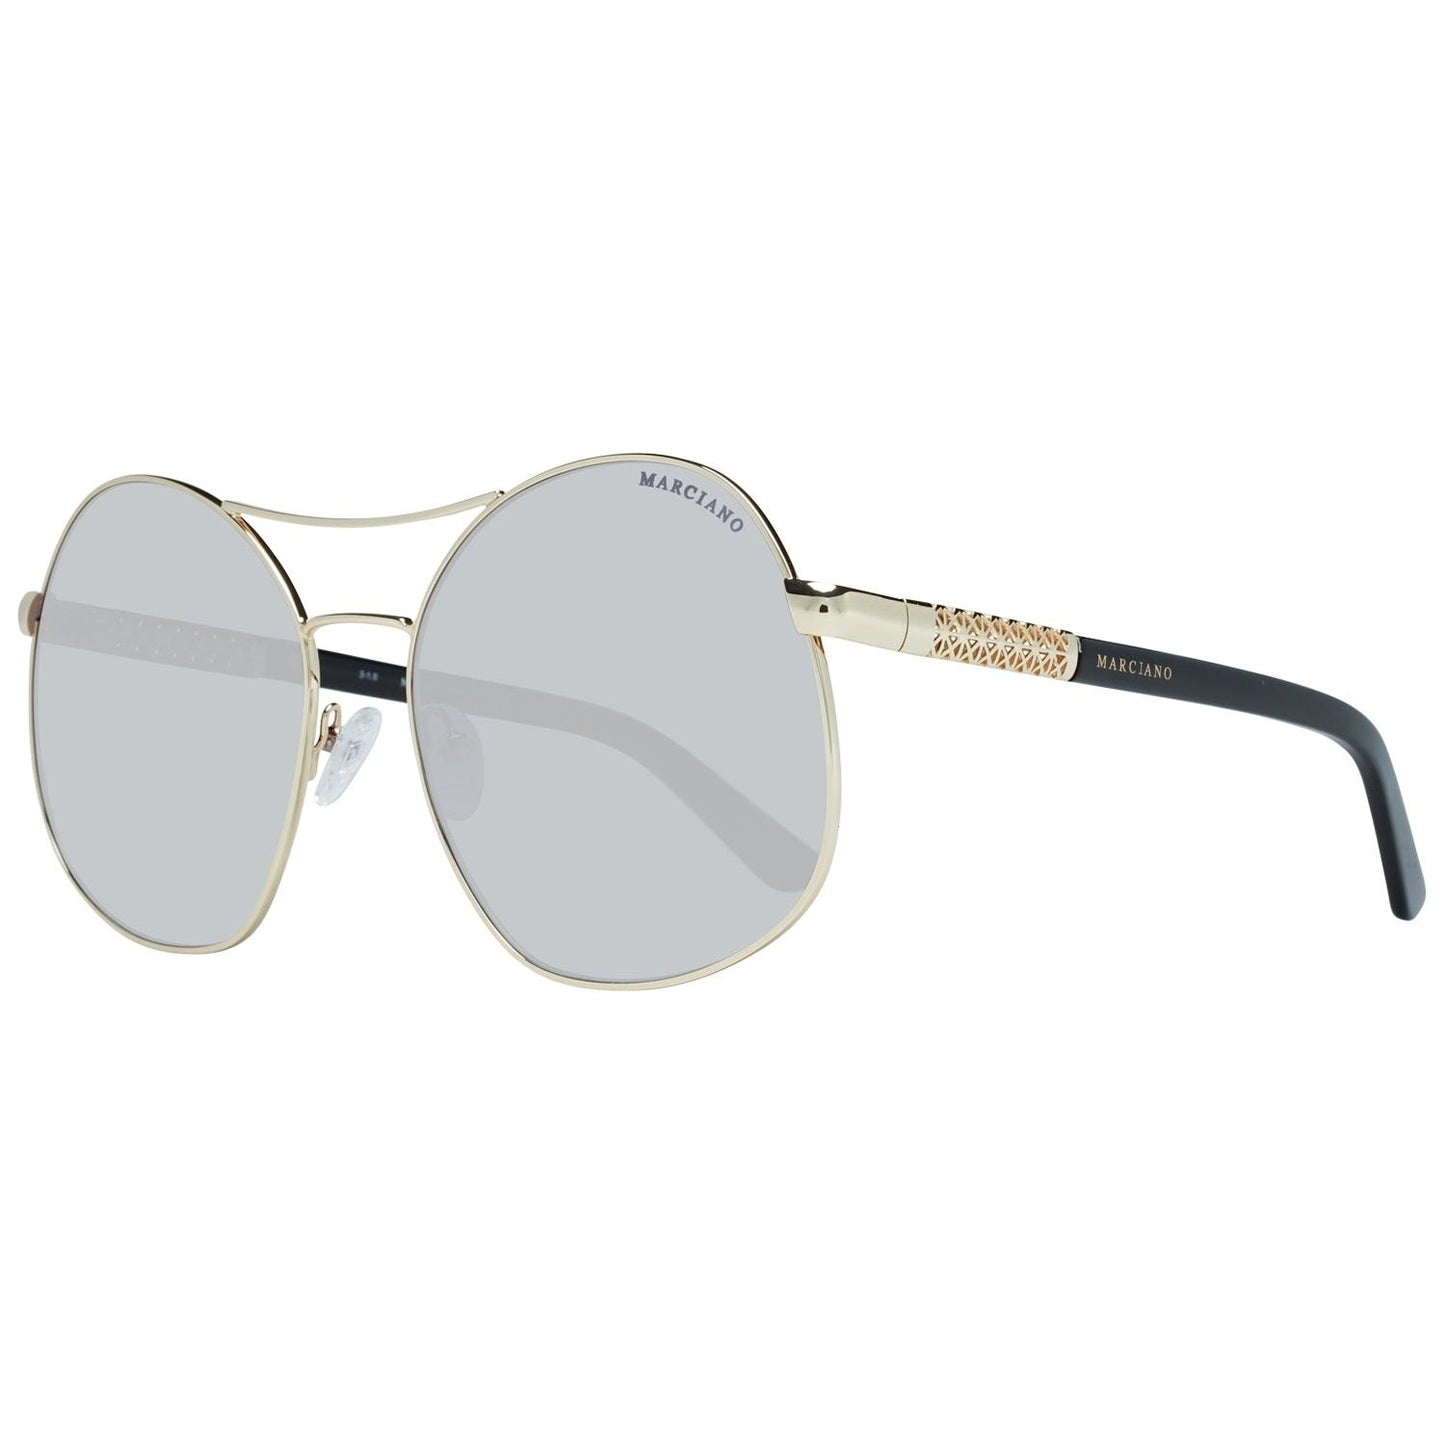 MARCIANO By GUESS SUNGLASSES MARCIANO BY GUESS MOD. GM0807 6232C SUNGLASSES & EYEWEAR marciano-by-guess-mod-gm0807-6232c